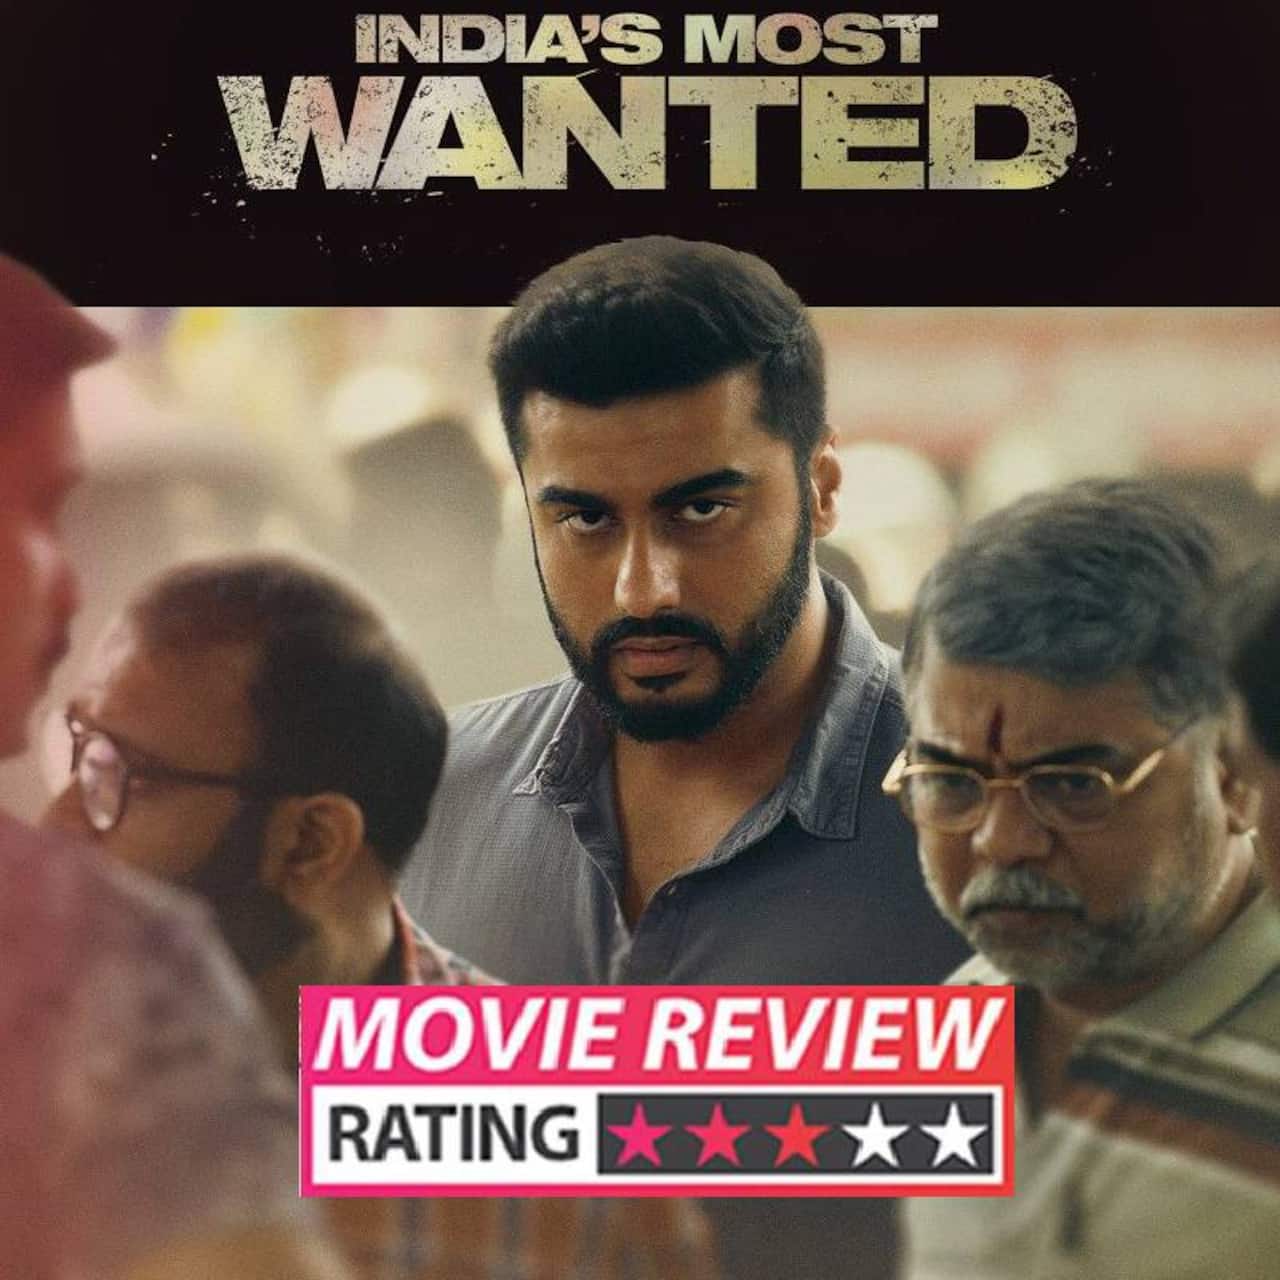 India's Most Wanted movie review: Arjun Kapoor hits the bullseye with his understated performance in this spy thriller